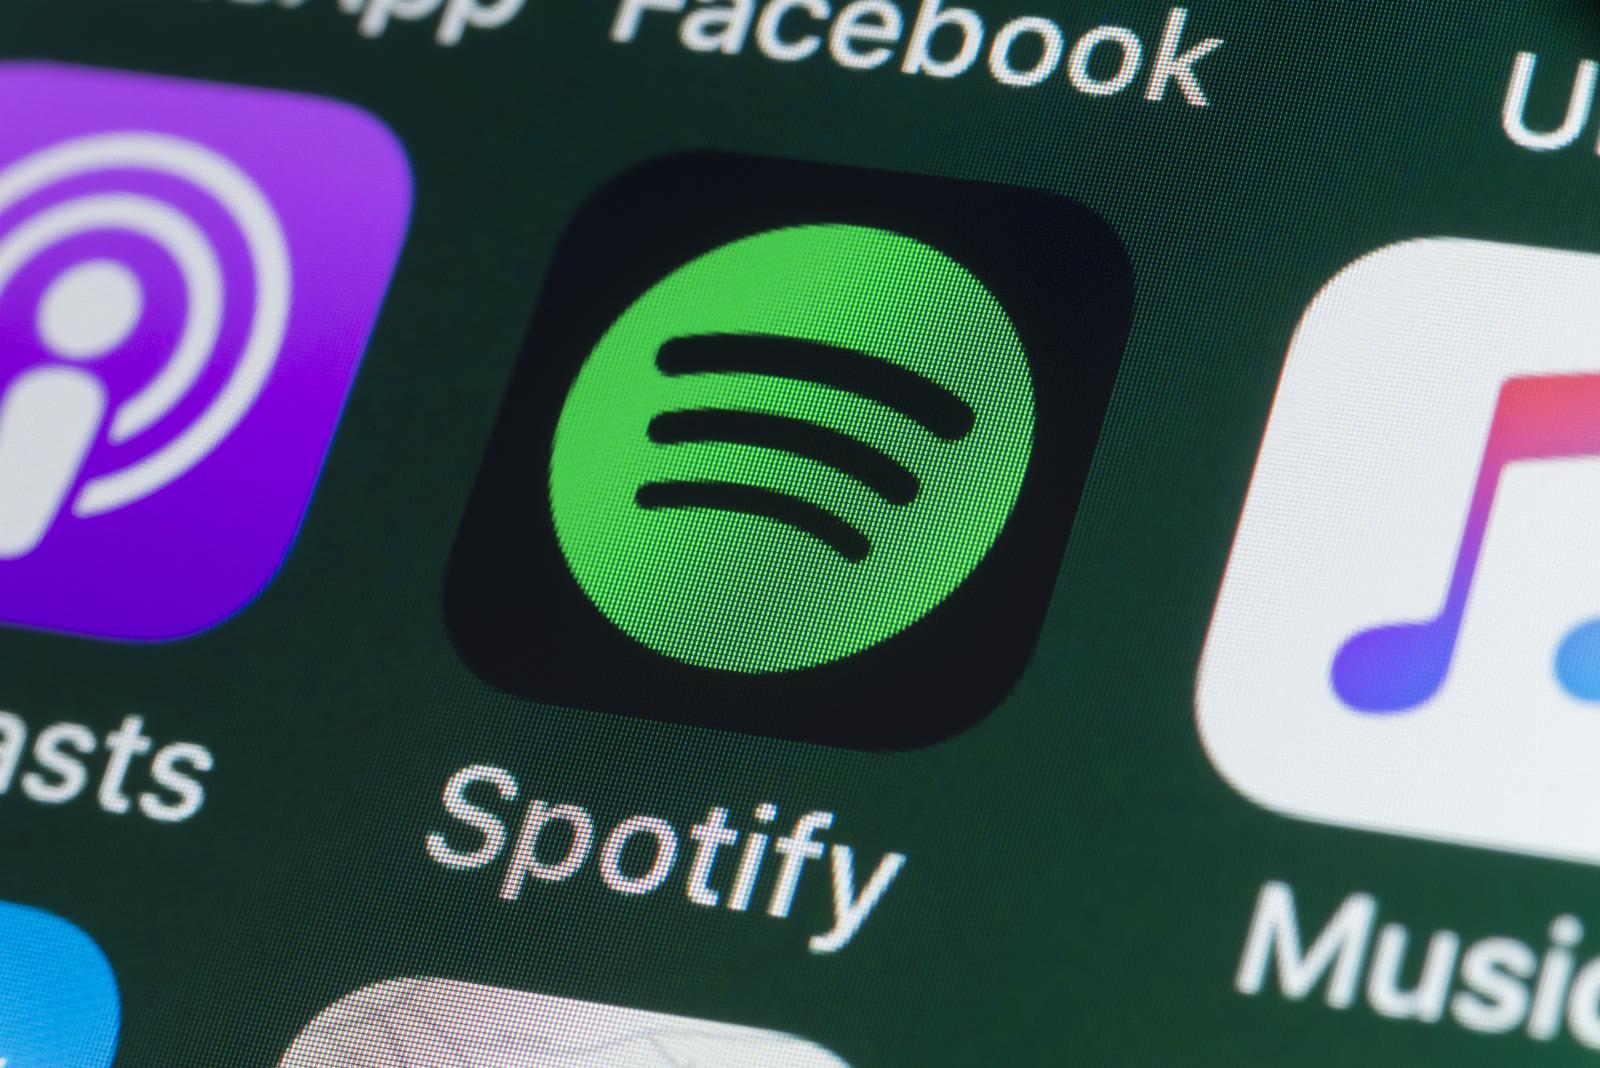 Spotify’s third-party billing option has now reached over 140 global markets